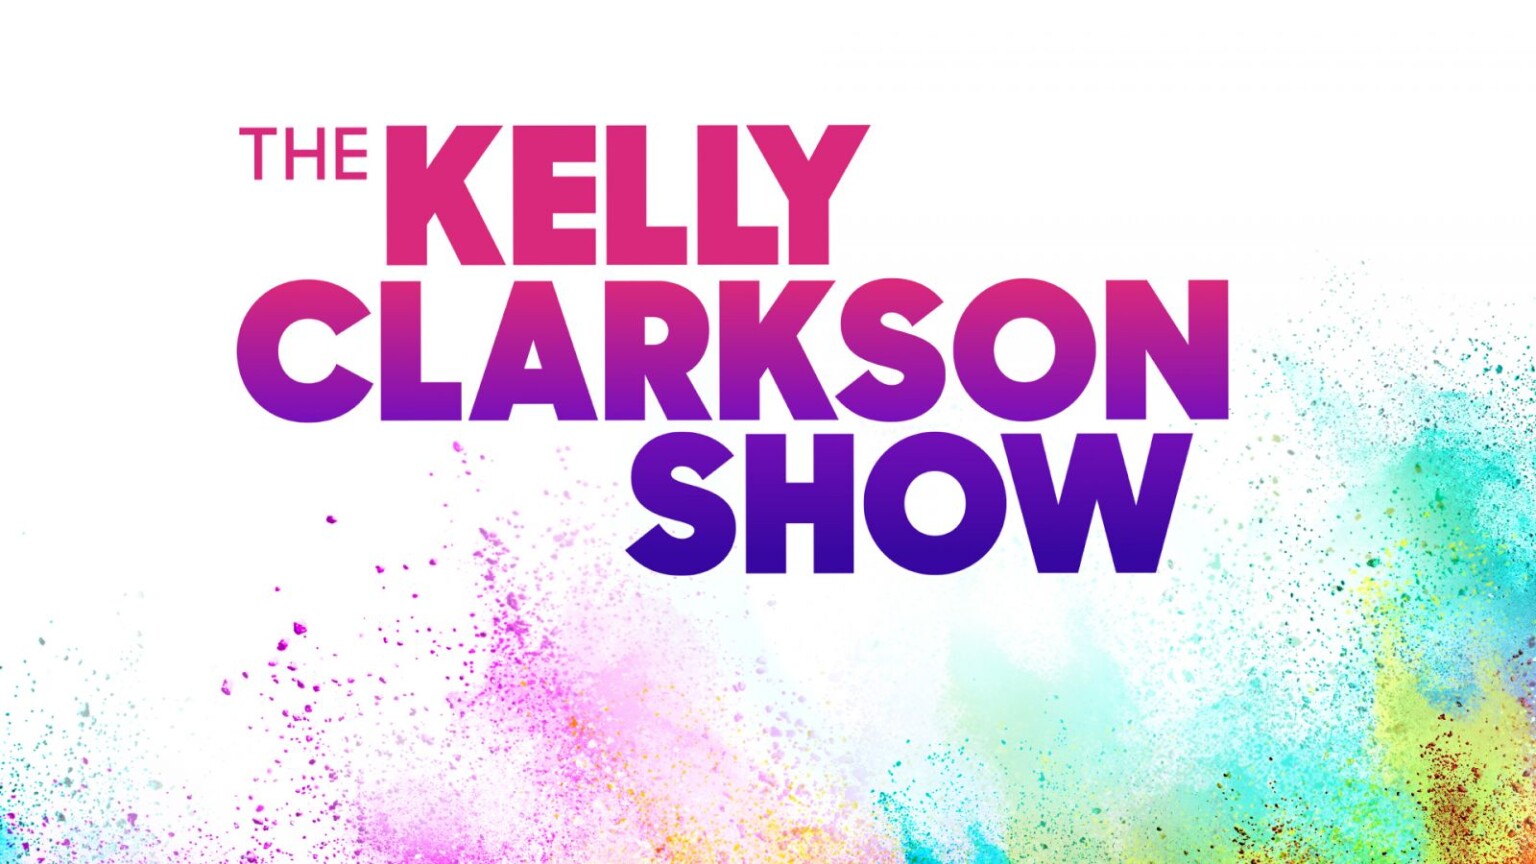 How to Watch 'The Kelly Clarkson Show' Online Live Stream Season 1